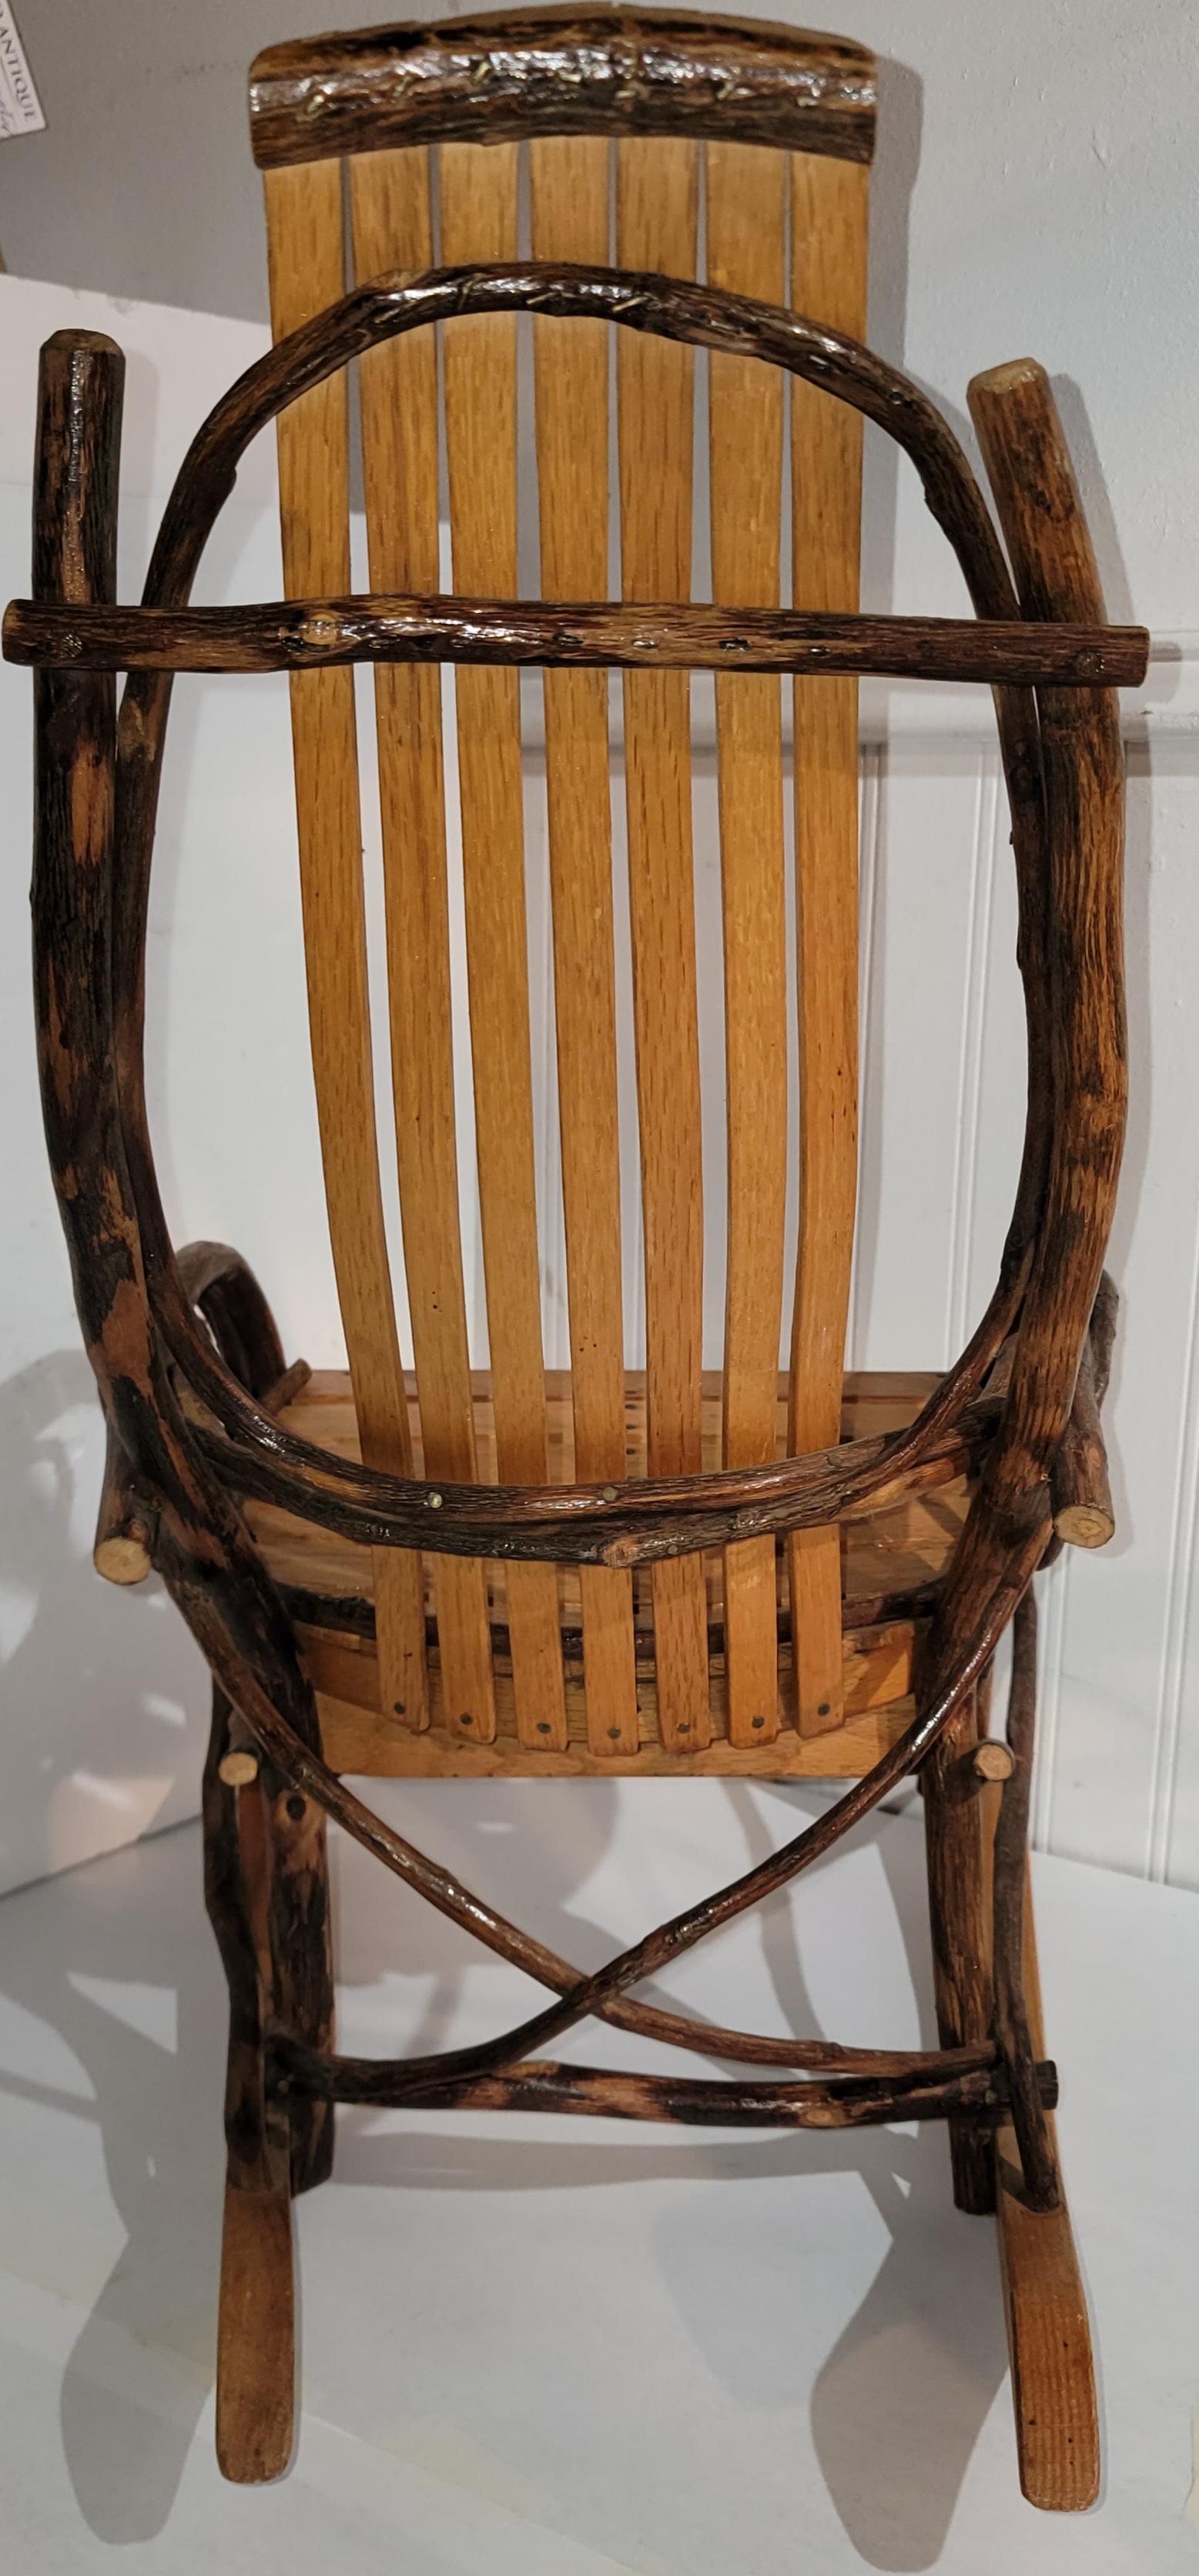 20th Century Amish Children's Rocking Chairs From Lancaster, Pa.-3